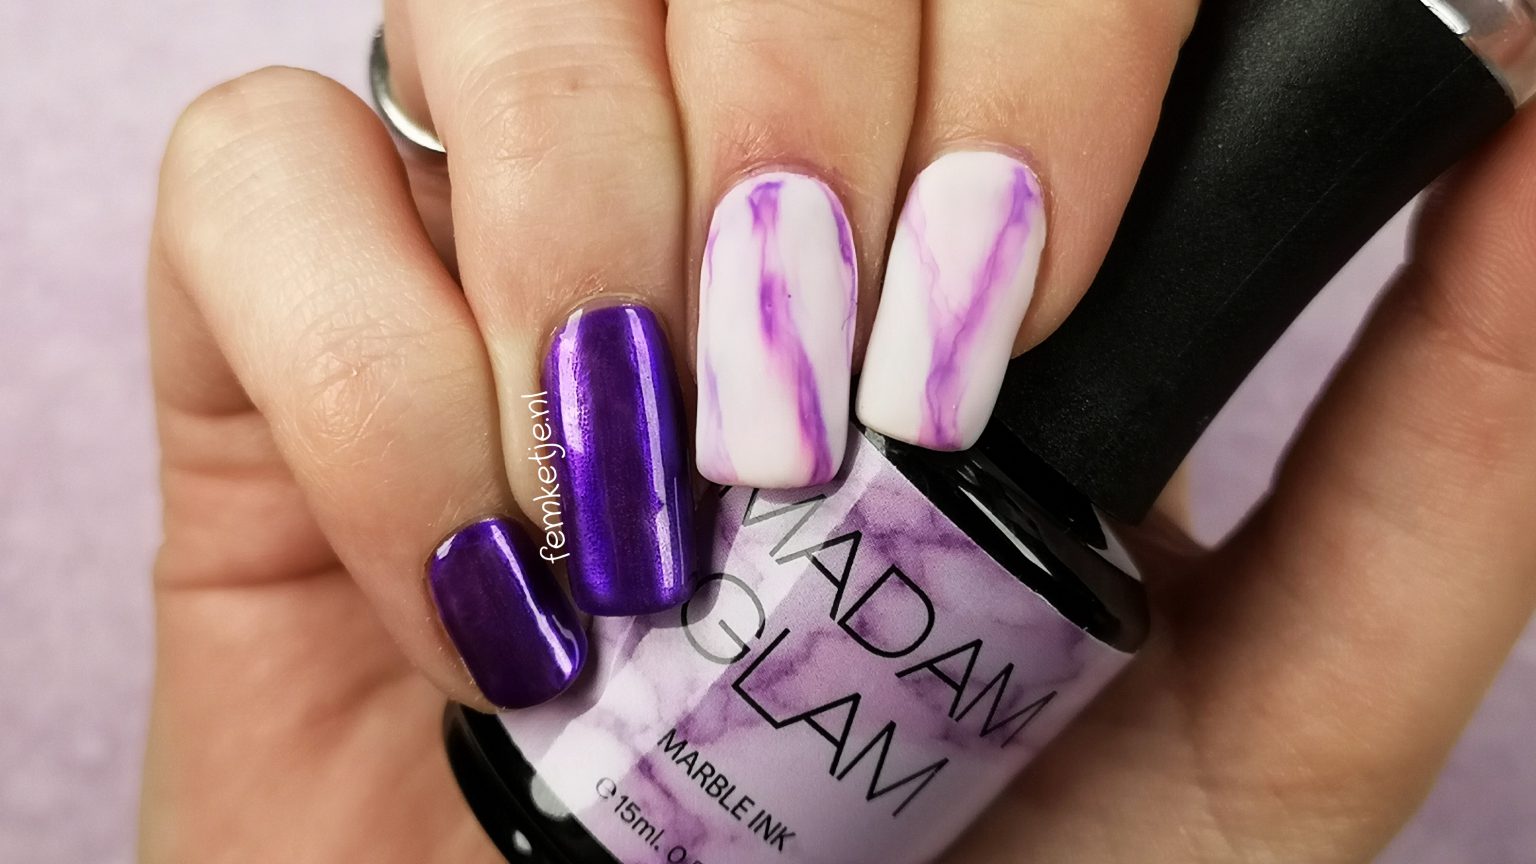 3. Lavender and Ink Nail Art Inspiration - wide 3